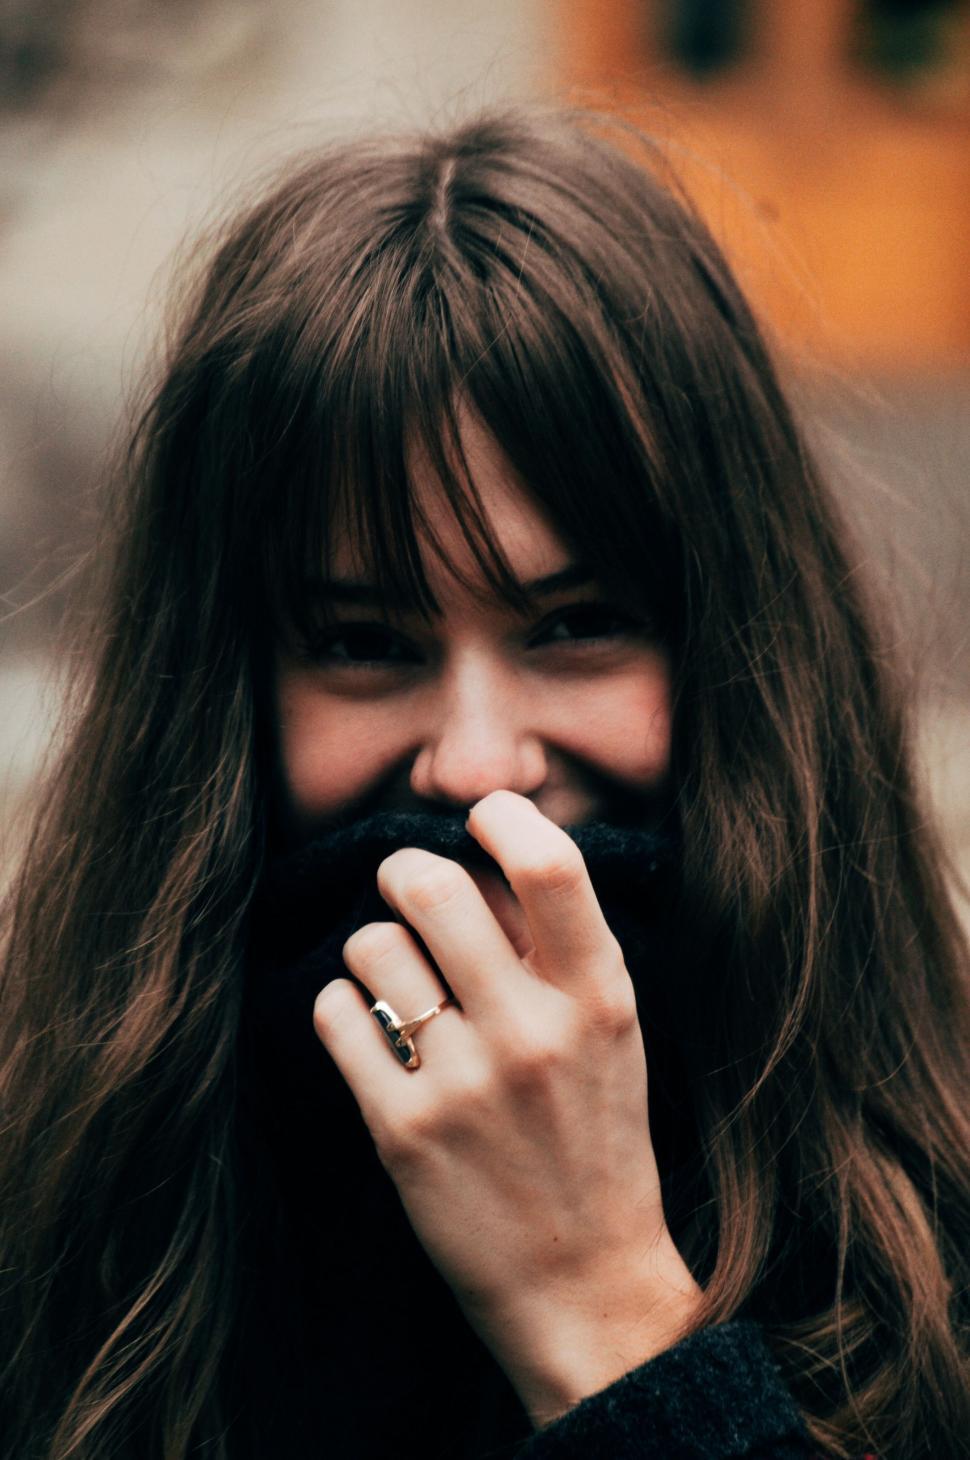 Free Image of Woman With Long Hair and Ring on Finger 